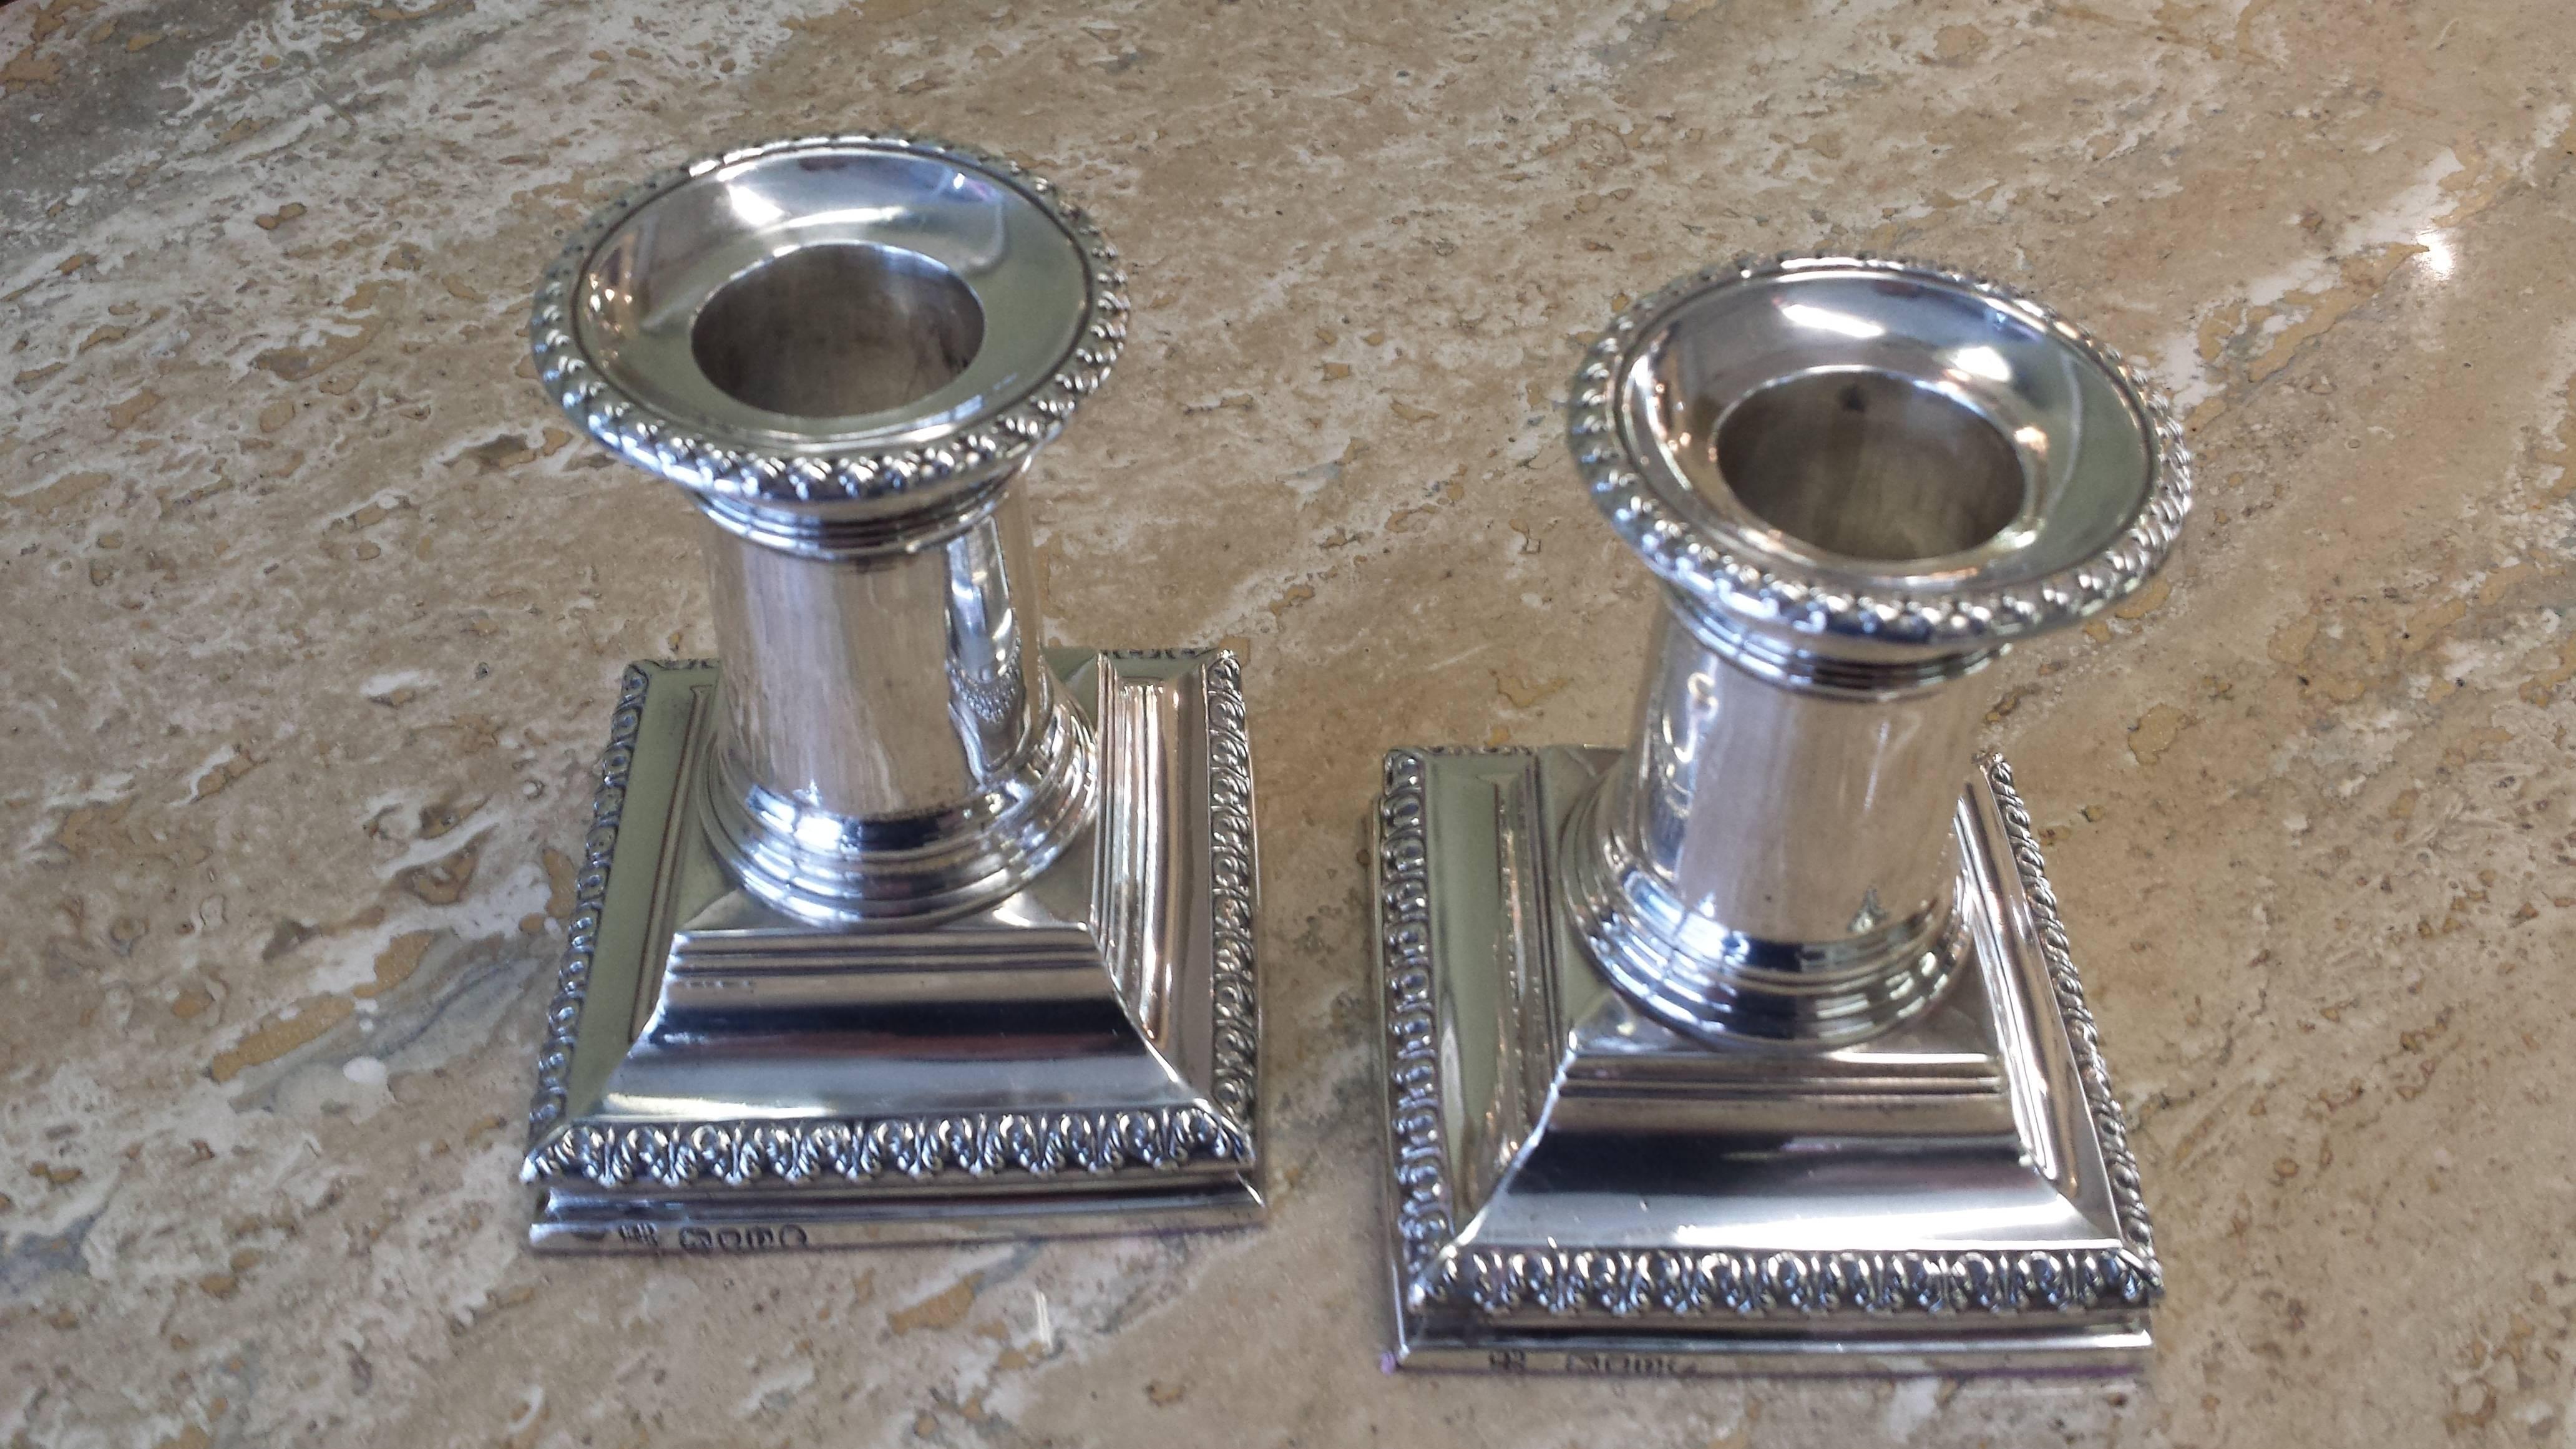 Sterling silver candlesticks, London by Richard Hodd & Son, Hallmarked for 1879, detachable drip tops, smooth column, embossed tops and base, with felt covered bottoms. The candlesticks measure 3 1/2"-inches high x 2 3/4"-inches deep x